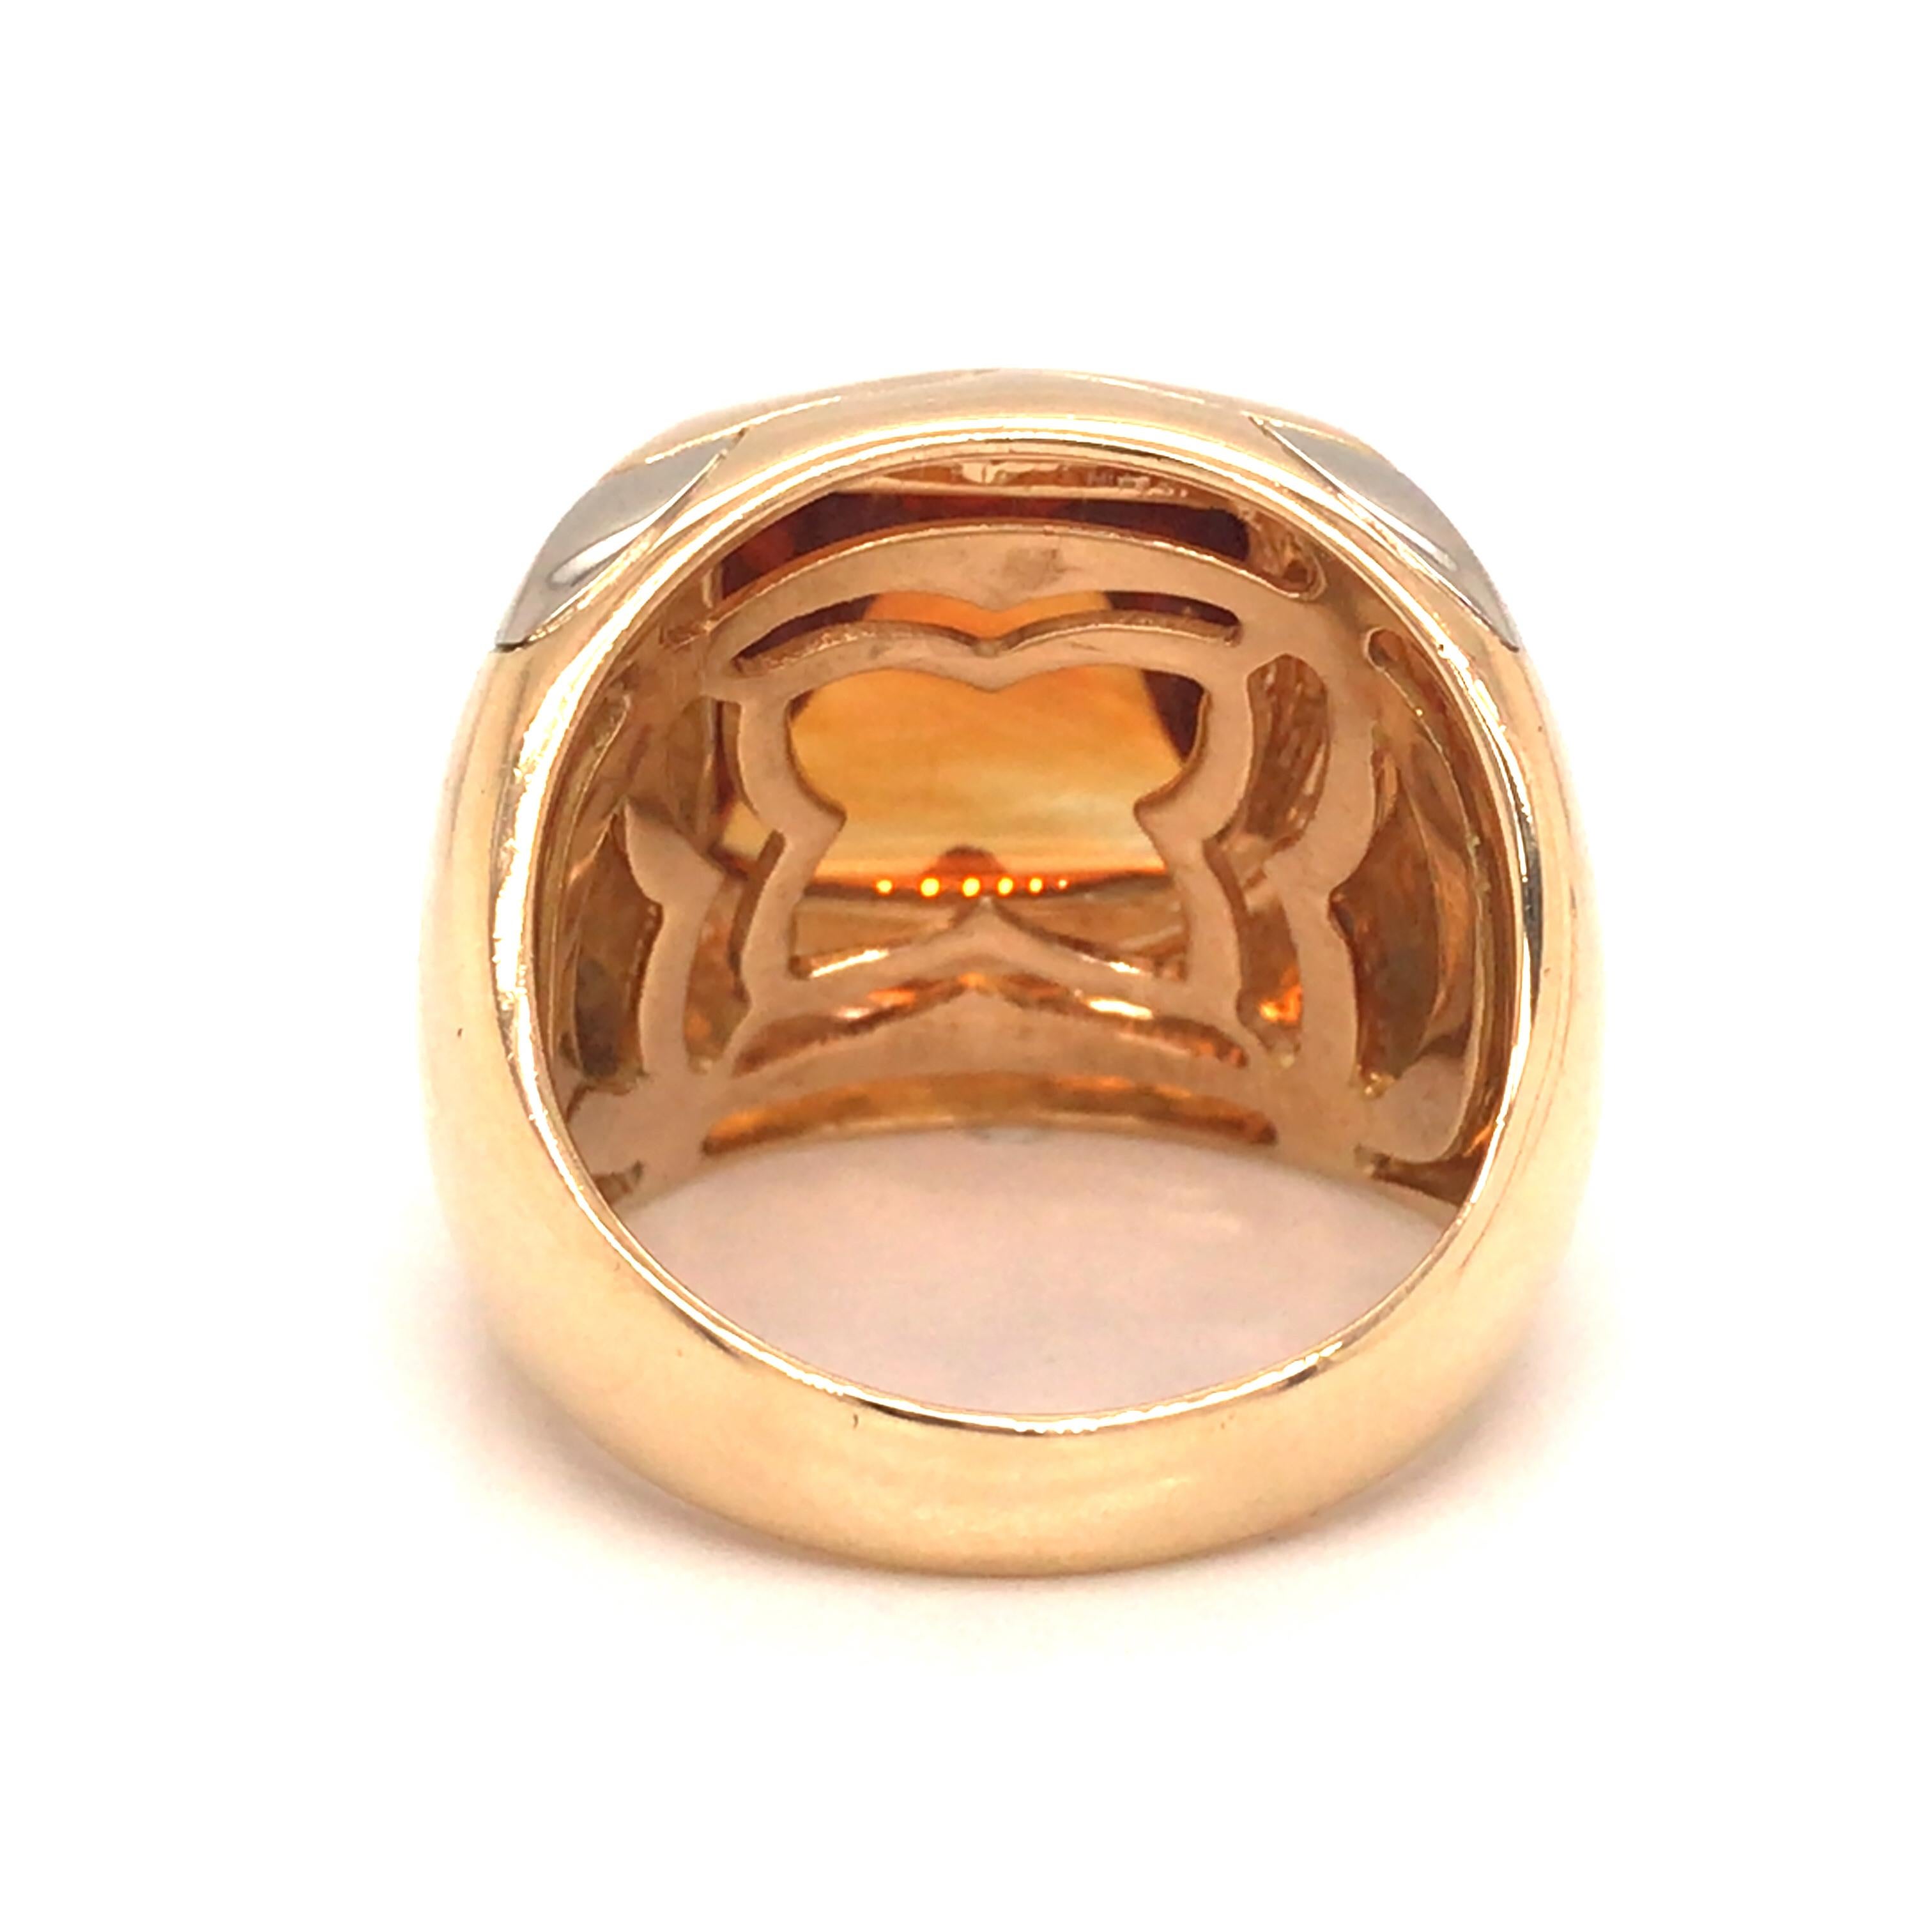 Bvlgari Pyramid Ring in 18k Yellow Gold In Good Condition For Sale In Boca Raton, FL